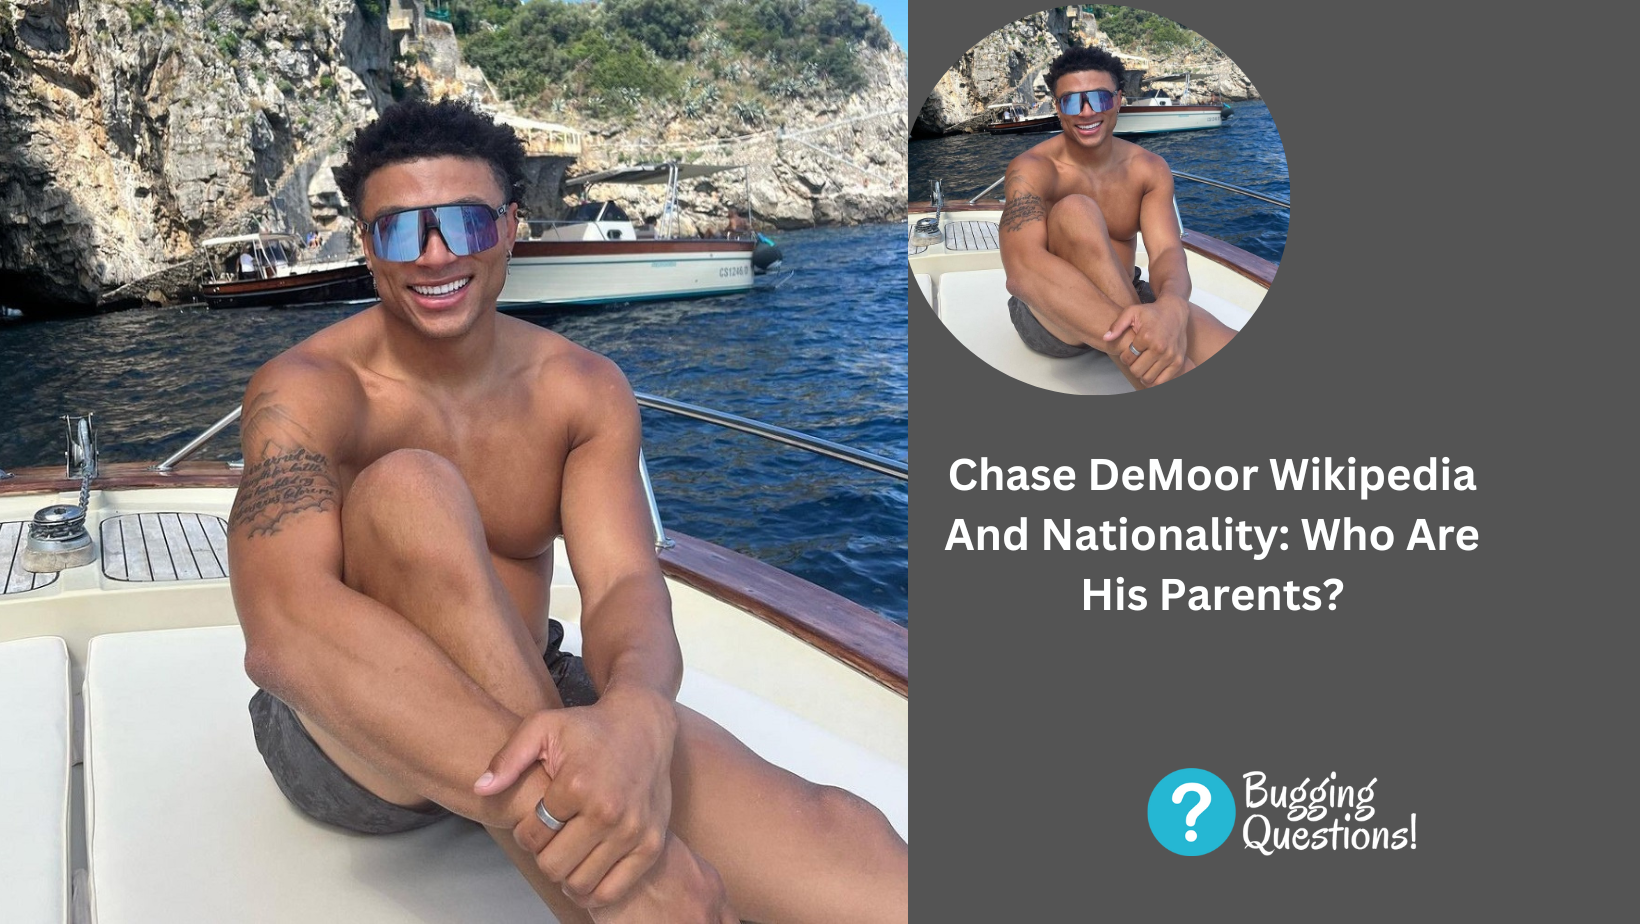 Chase DeMoor Wikipedia And Nationality: Who Are His Parents?